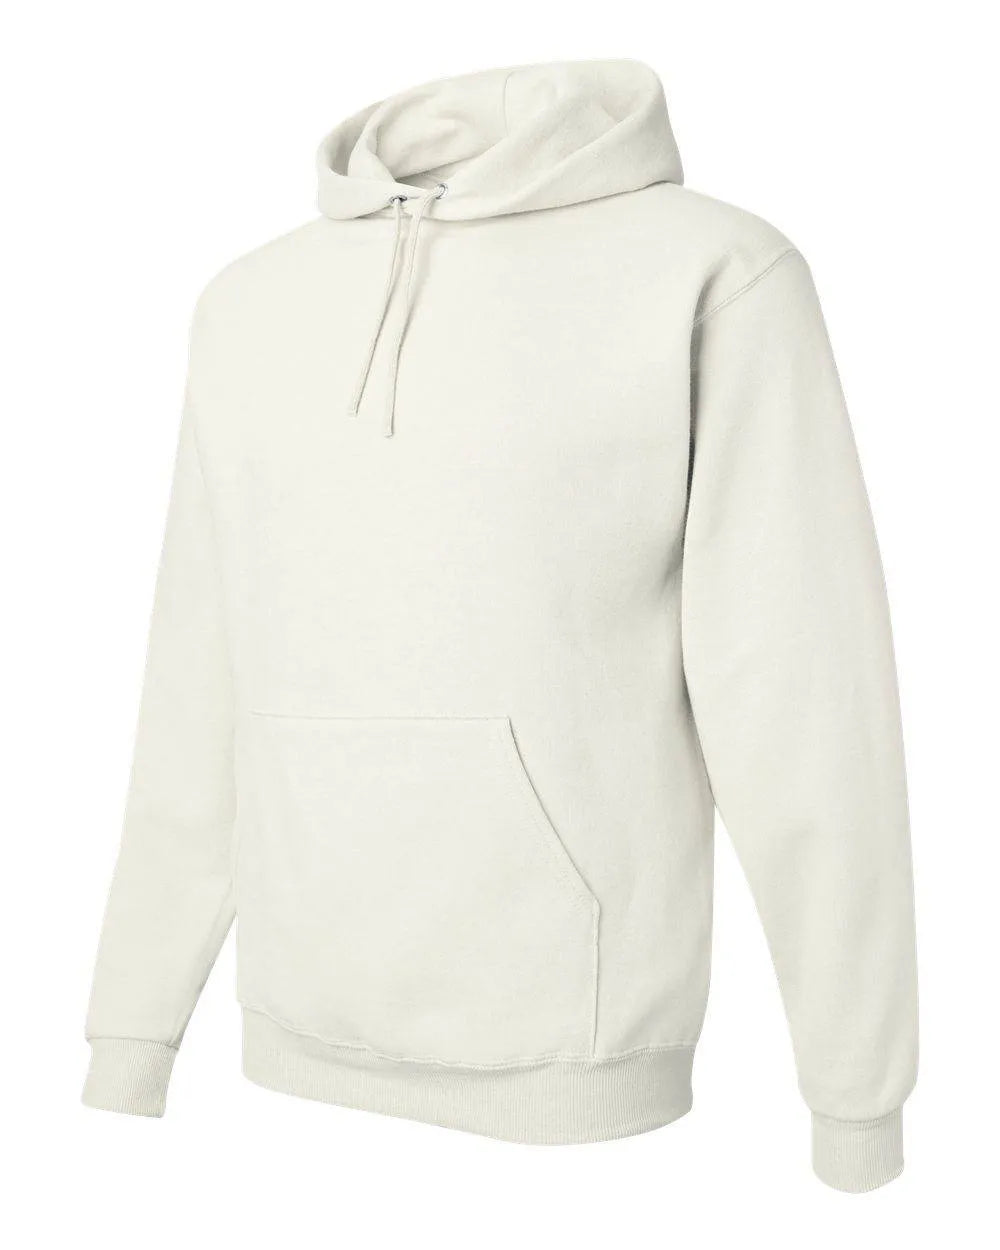 Expertly Crafted NuBlend® Hooded Sweatshirt - Customize Your Own